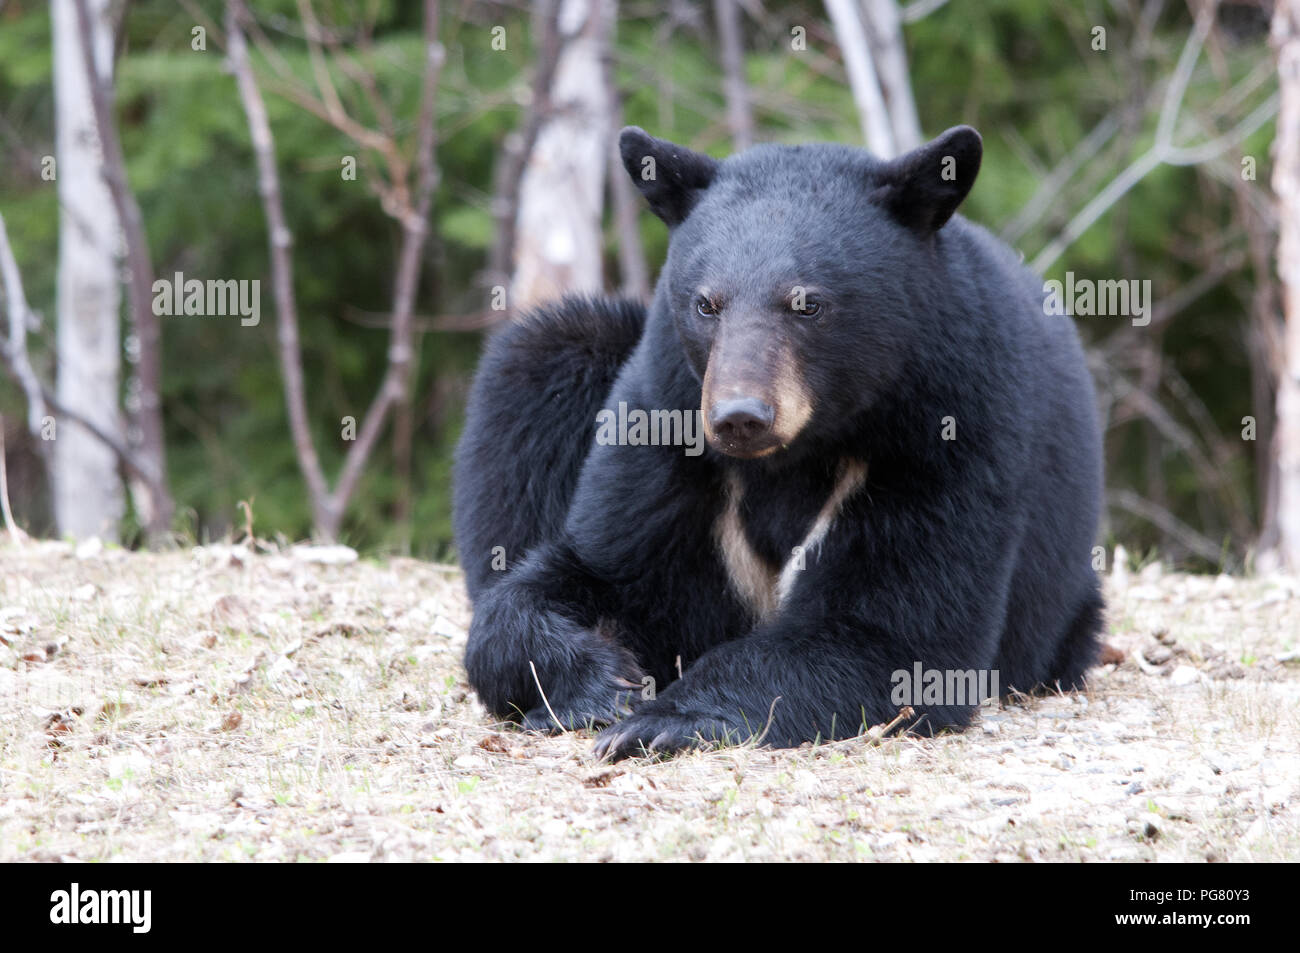 Black bear close up with a lucky charm symbol around its neck and displaying its body, head, ears, eyes, nose, paws and enjoying its surrounding. Stock Photo